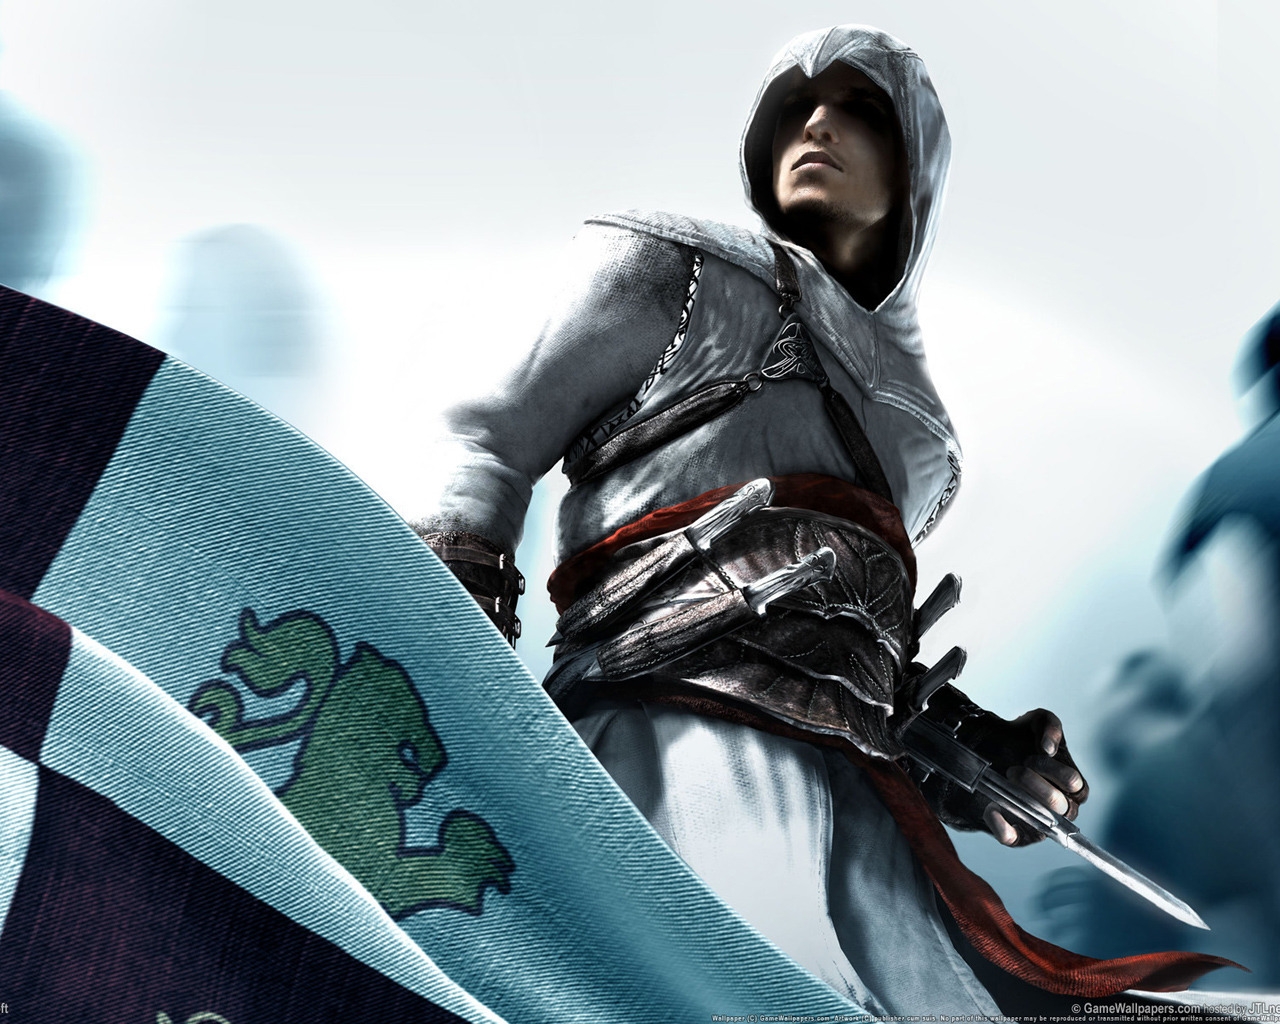 Beautiful Assassins Creed for 1280 x 1024 resolution